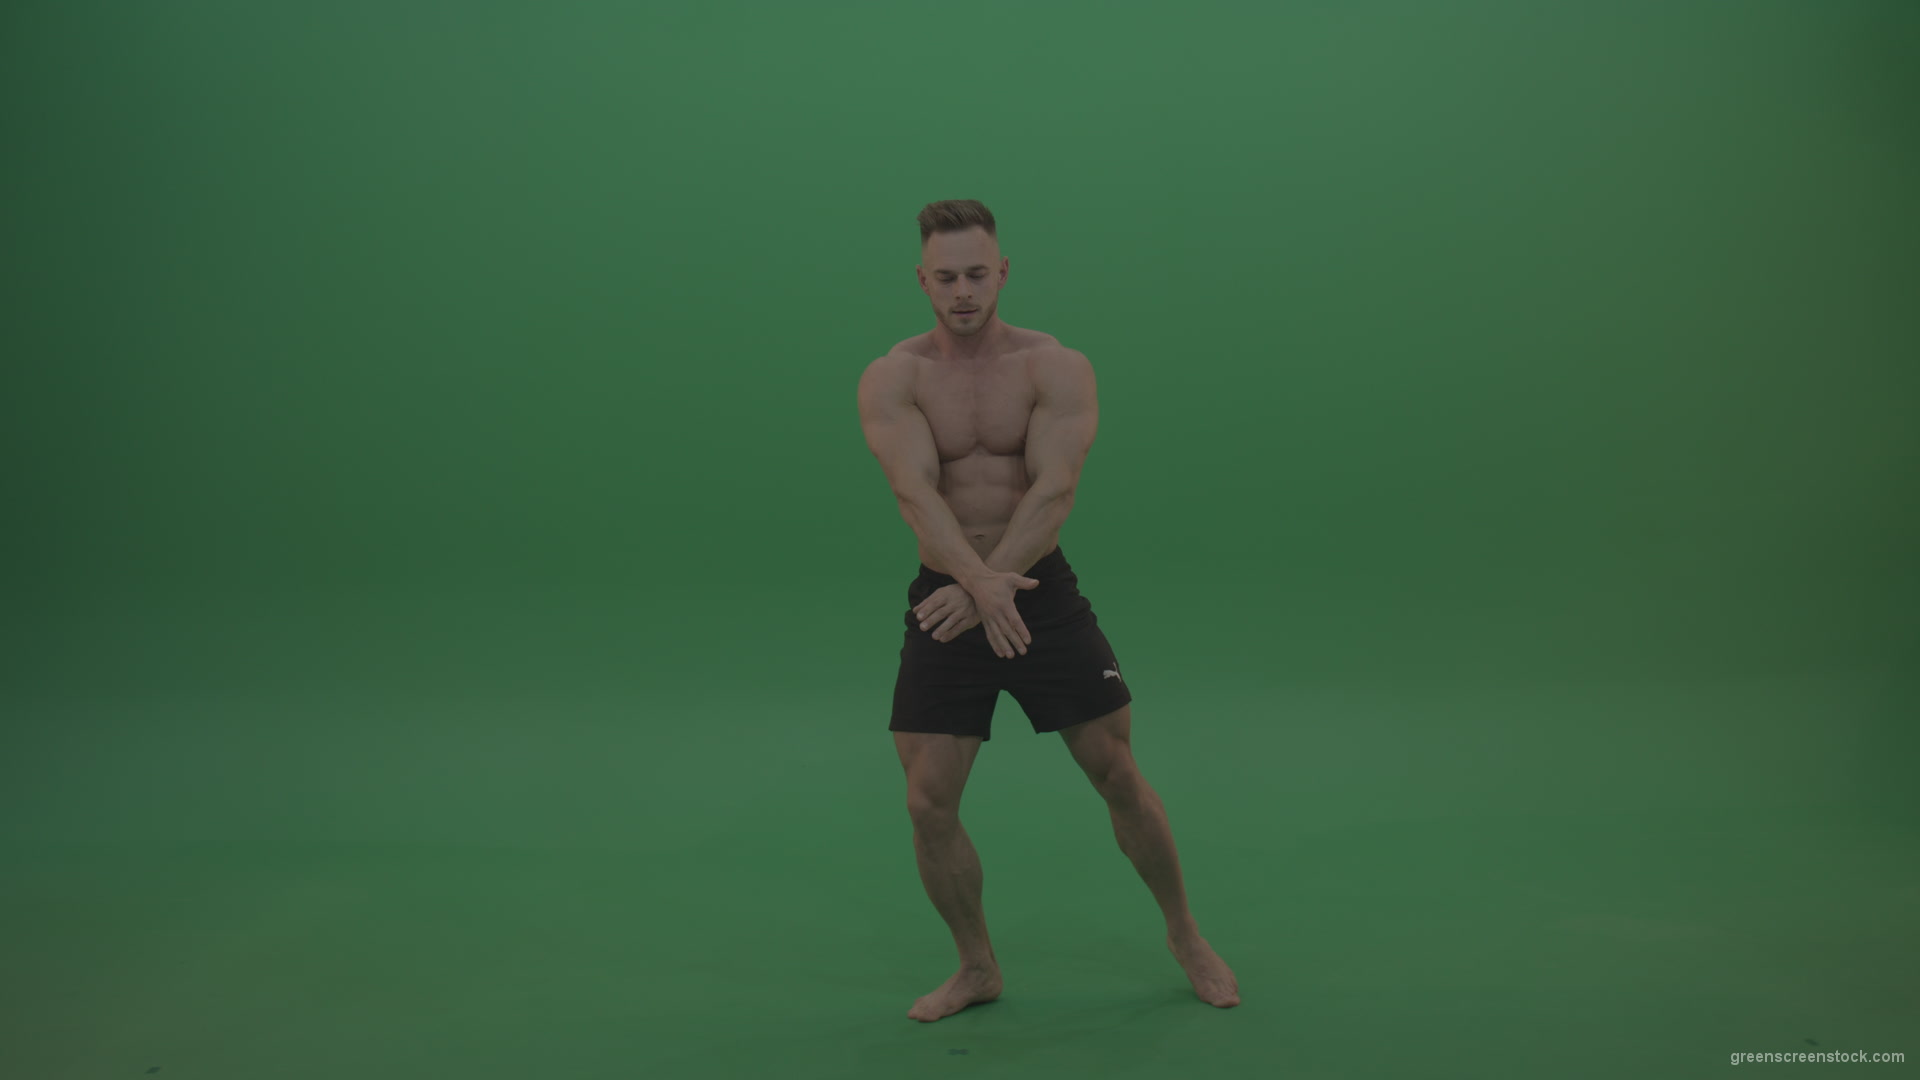 Young_Athletic_Bodybuilder_Demonstrating_Front_Double_Biceps_And_Lateral_Spread_Positions_On_Green_Screen_Wall_Background_007 Green Screen Stock